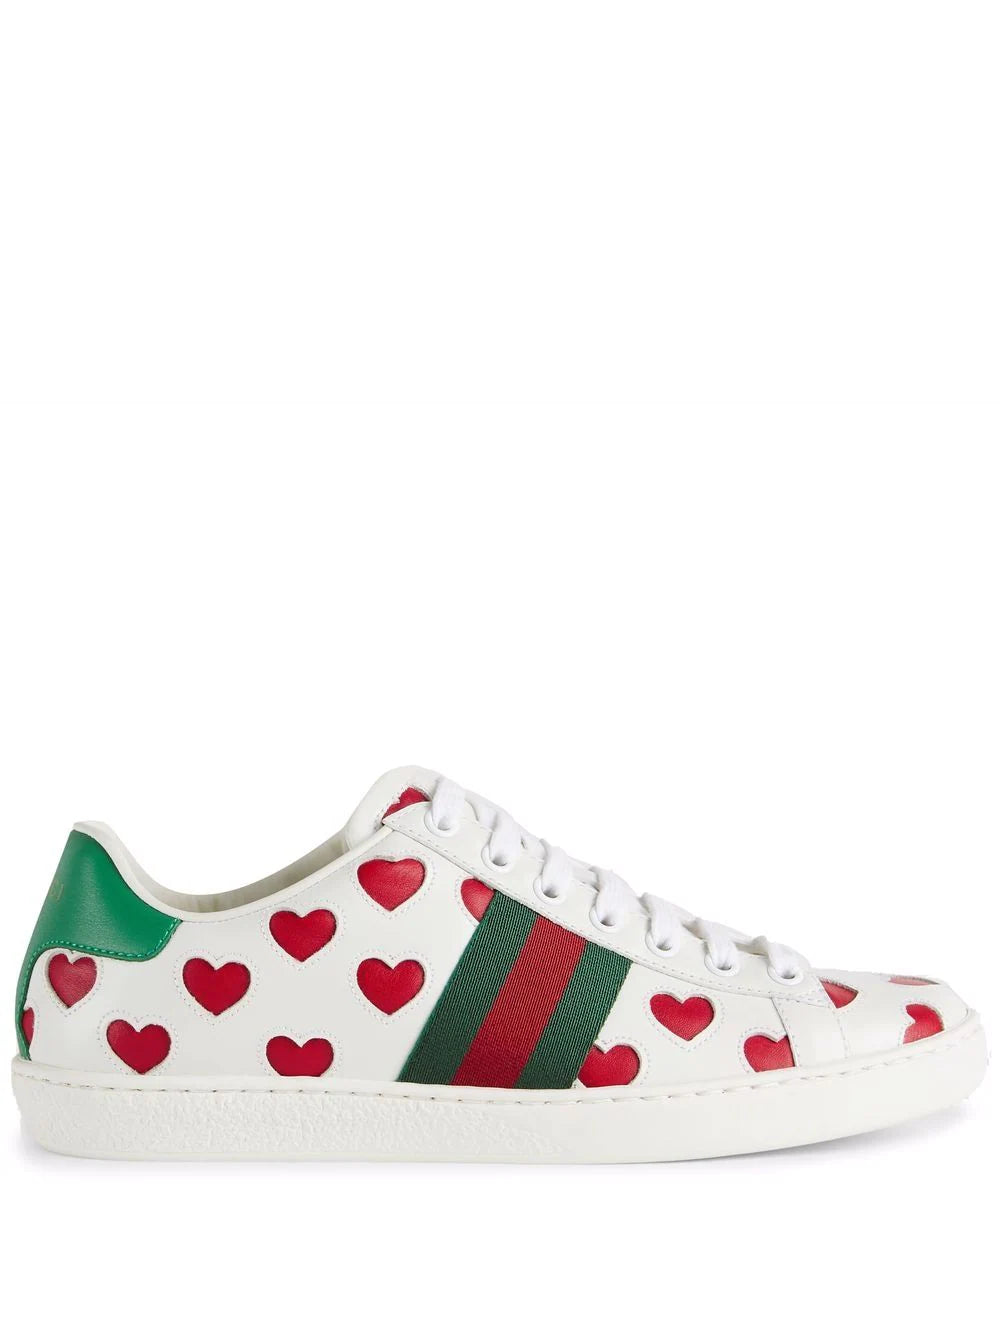 Wordt erger woensdag timer Gucci Ace lace-up sneakers - Joseph